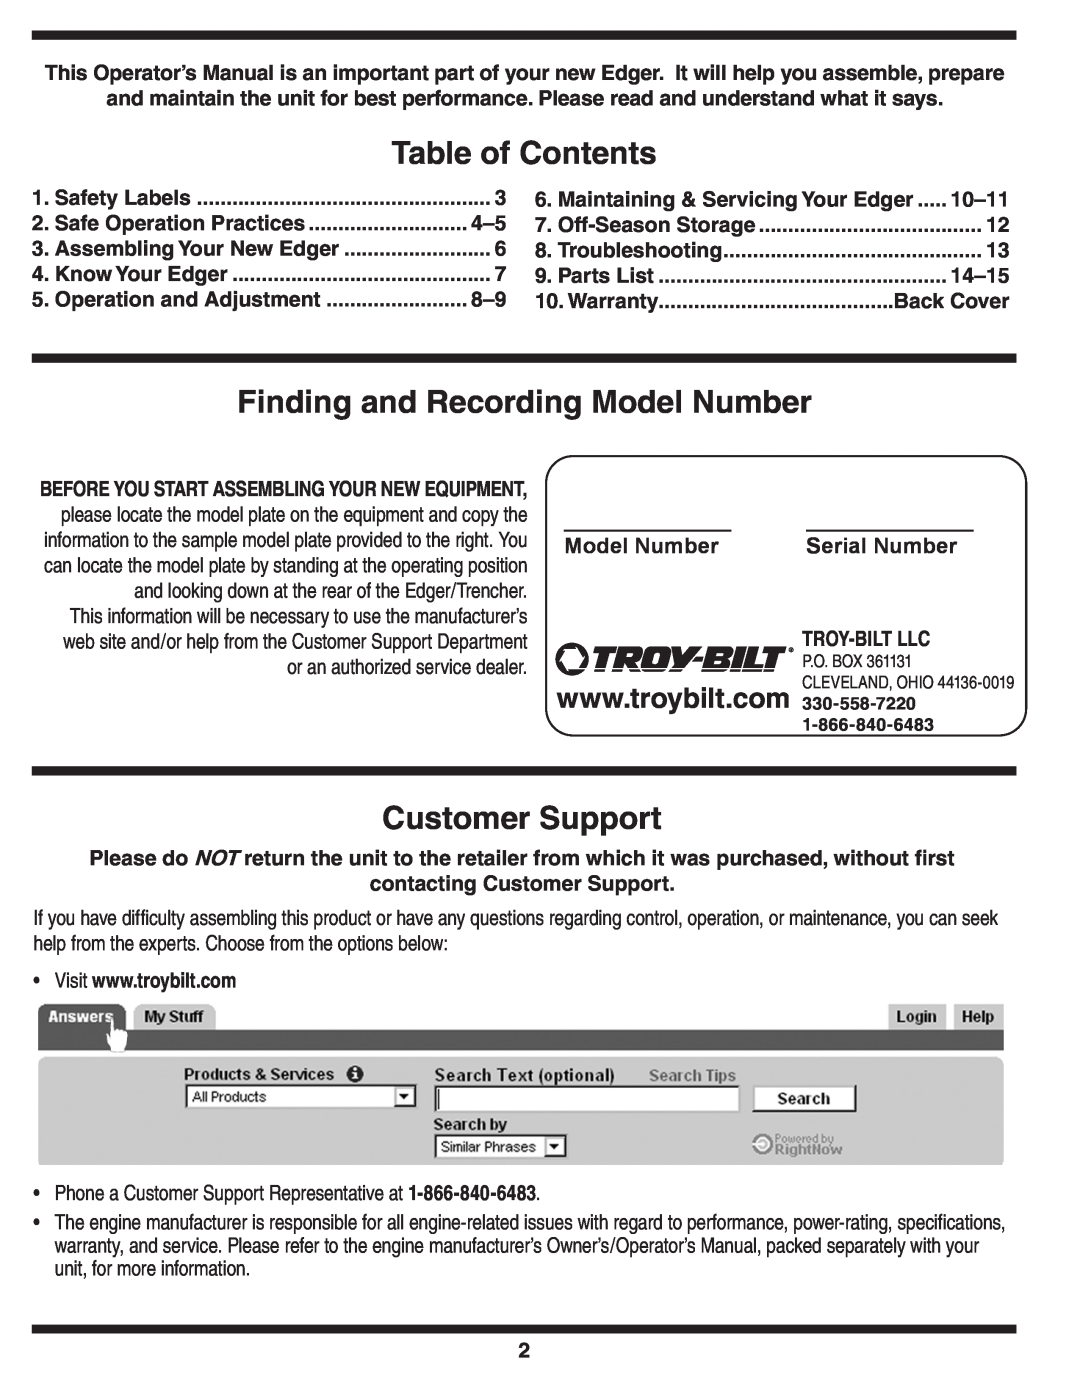 Troy-Bilt 554 manual Table of Contents, Finding and Recording Model Number, Customer Support, Serial Number 